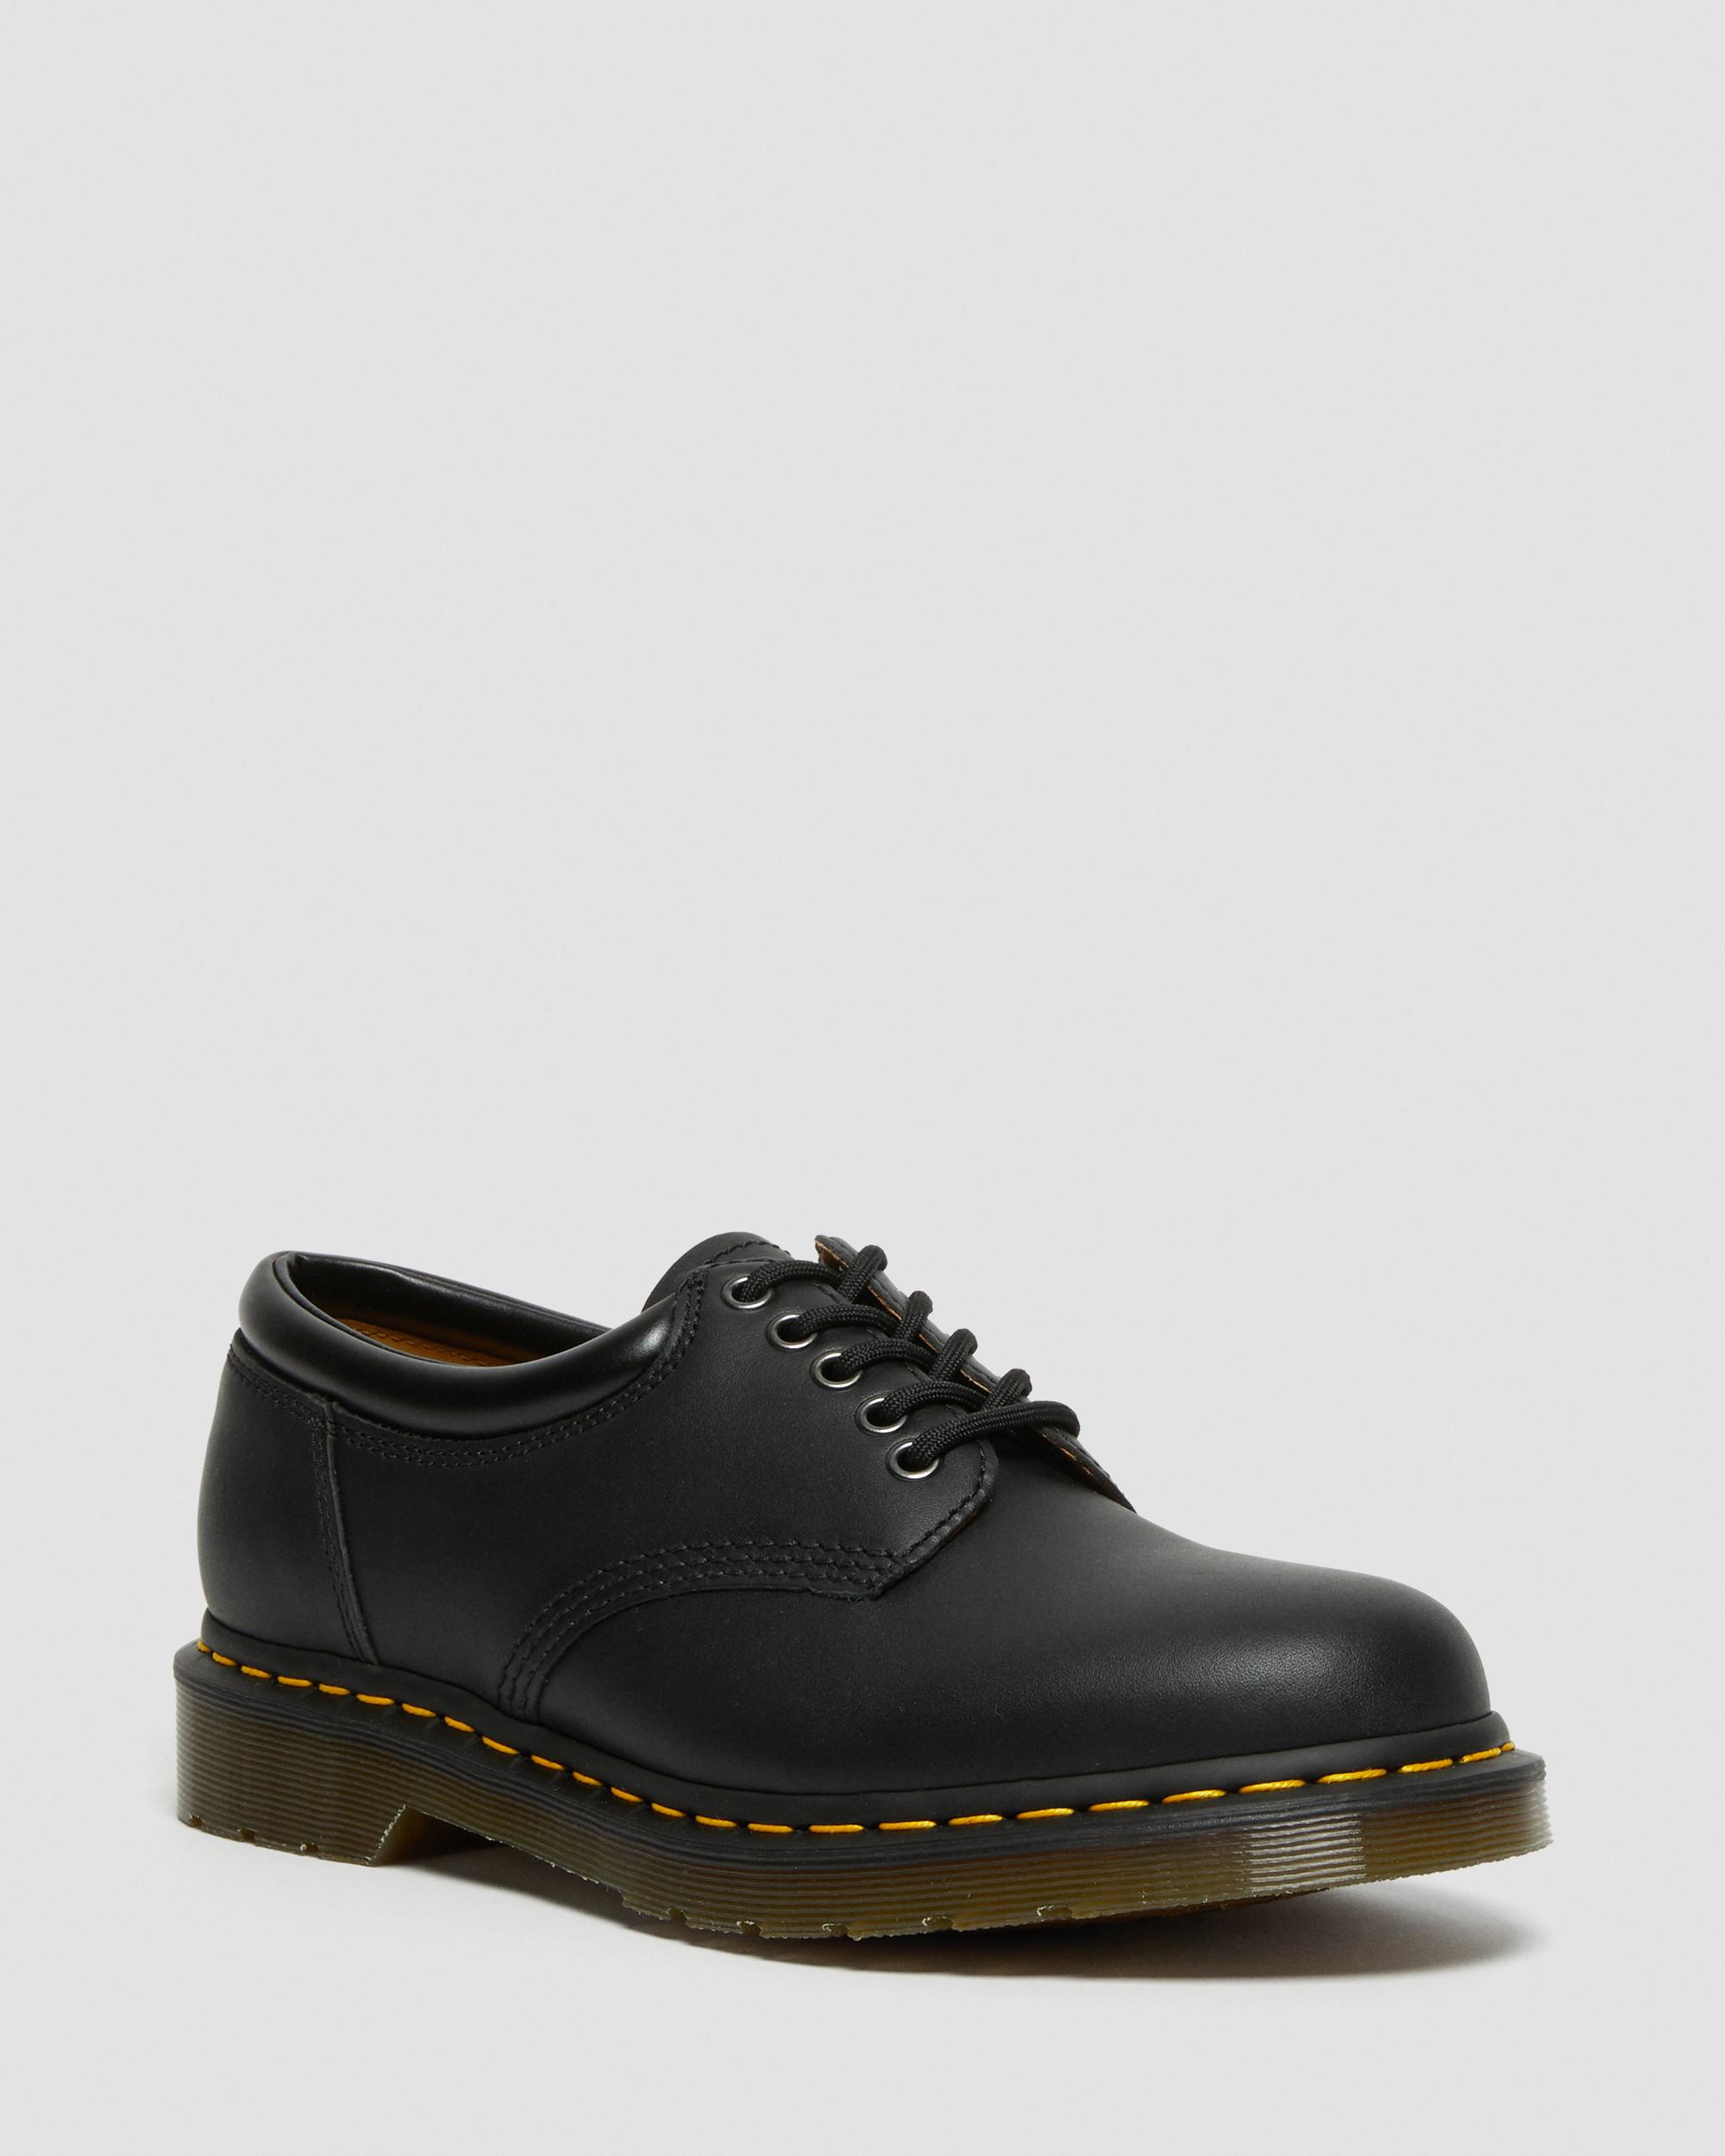 8053 Nappa Leather Shoes | Dr. Martens